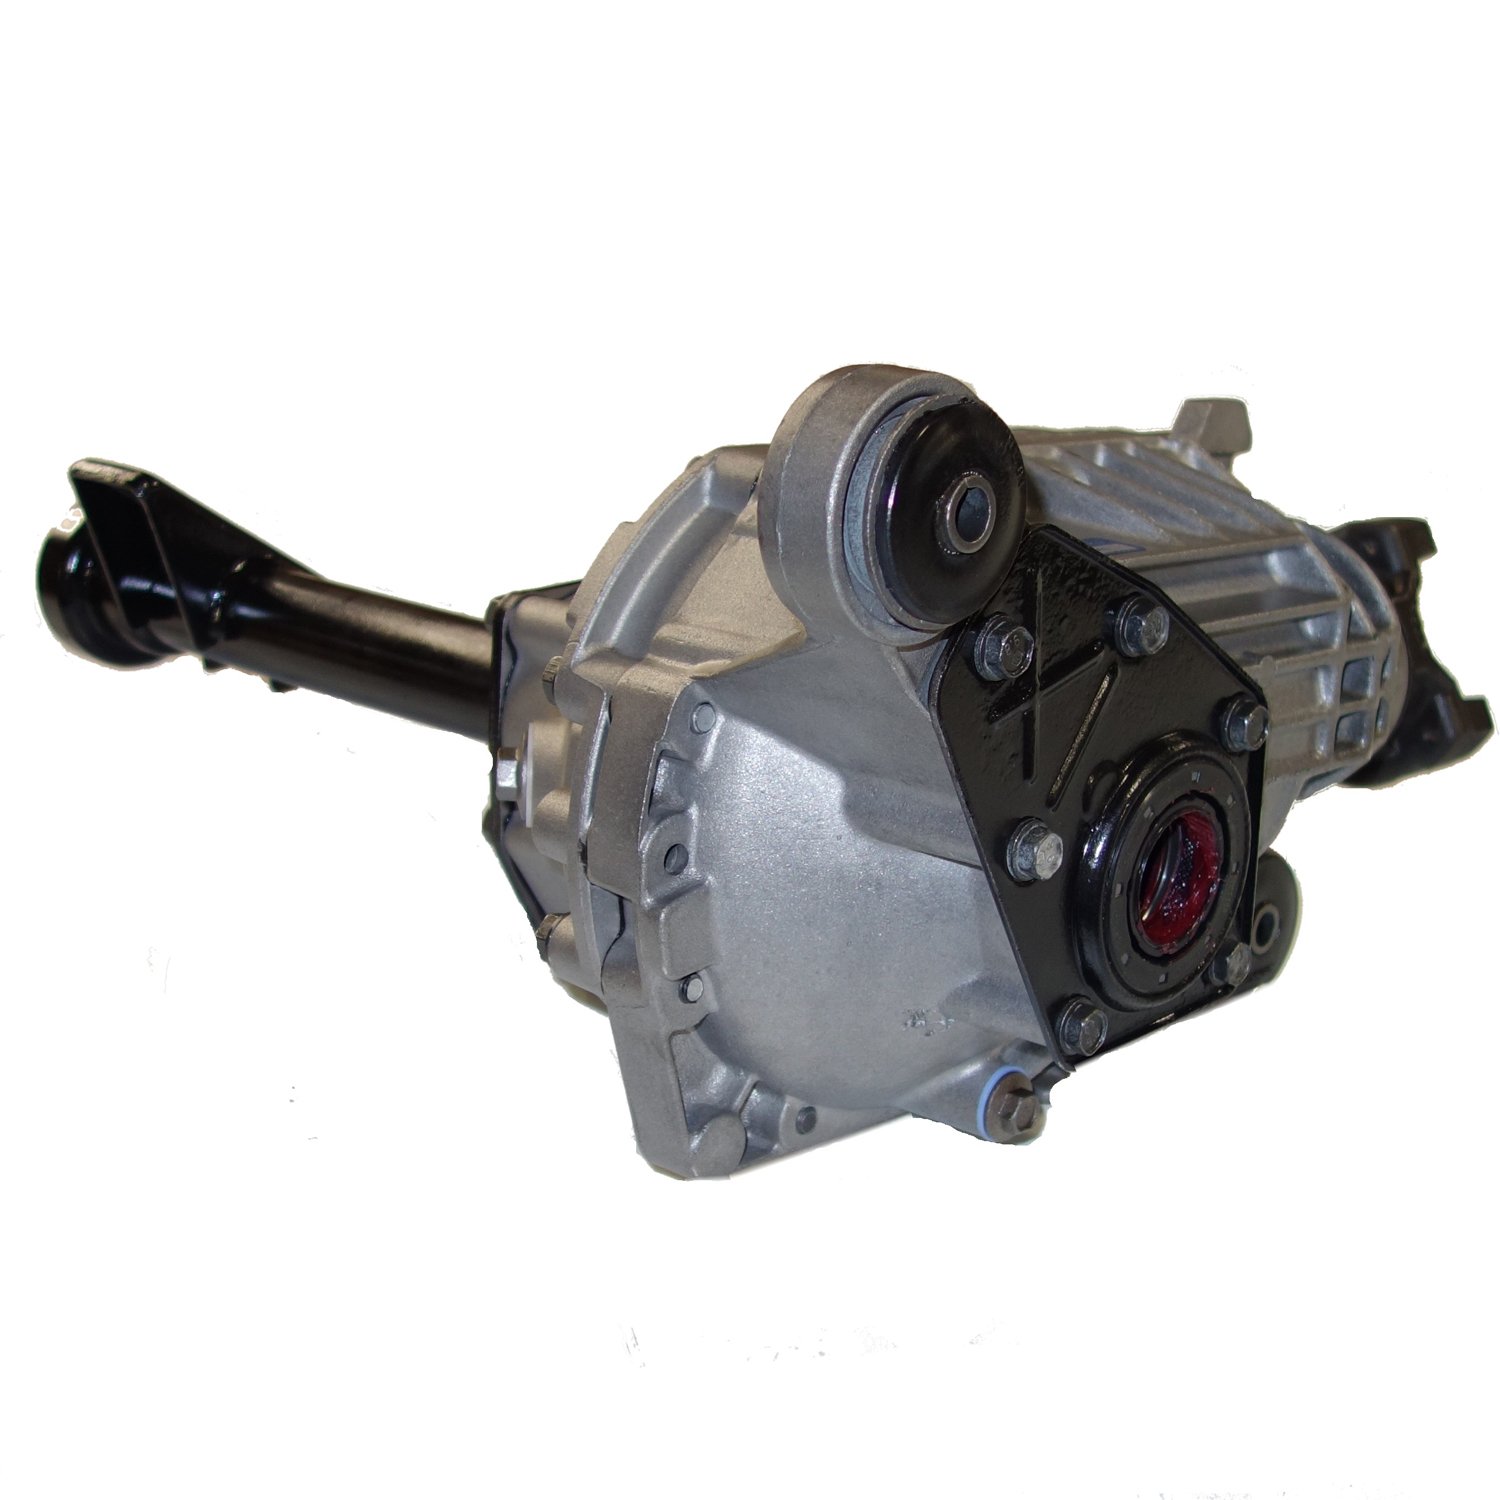 Remanufactured Axle Assembly for GM 7.2 IFS 99-05